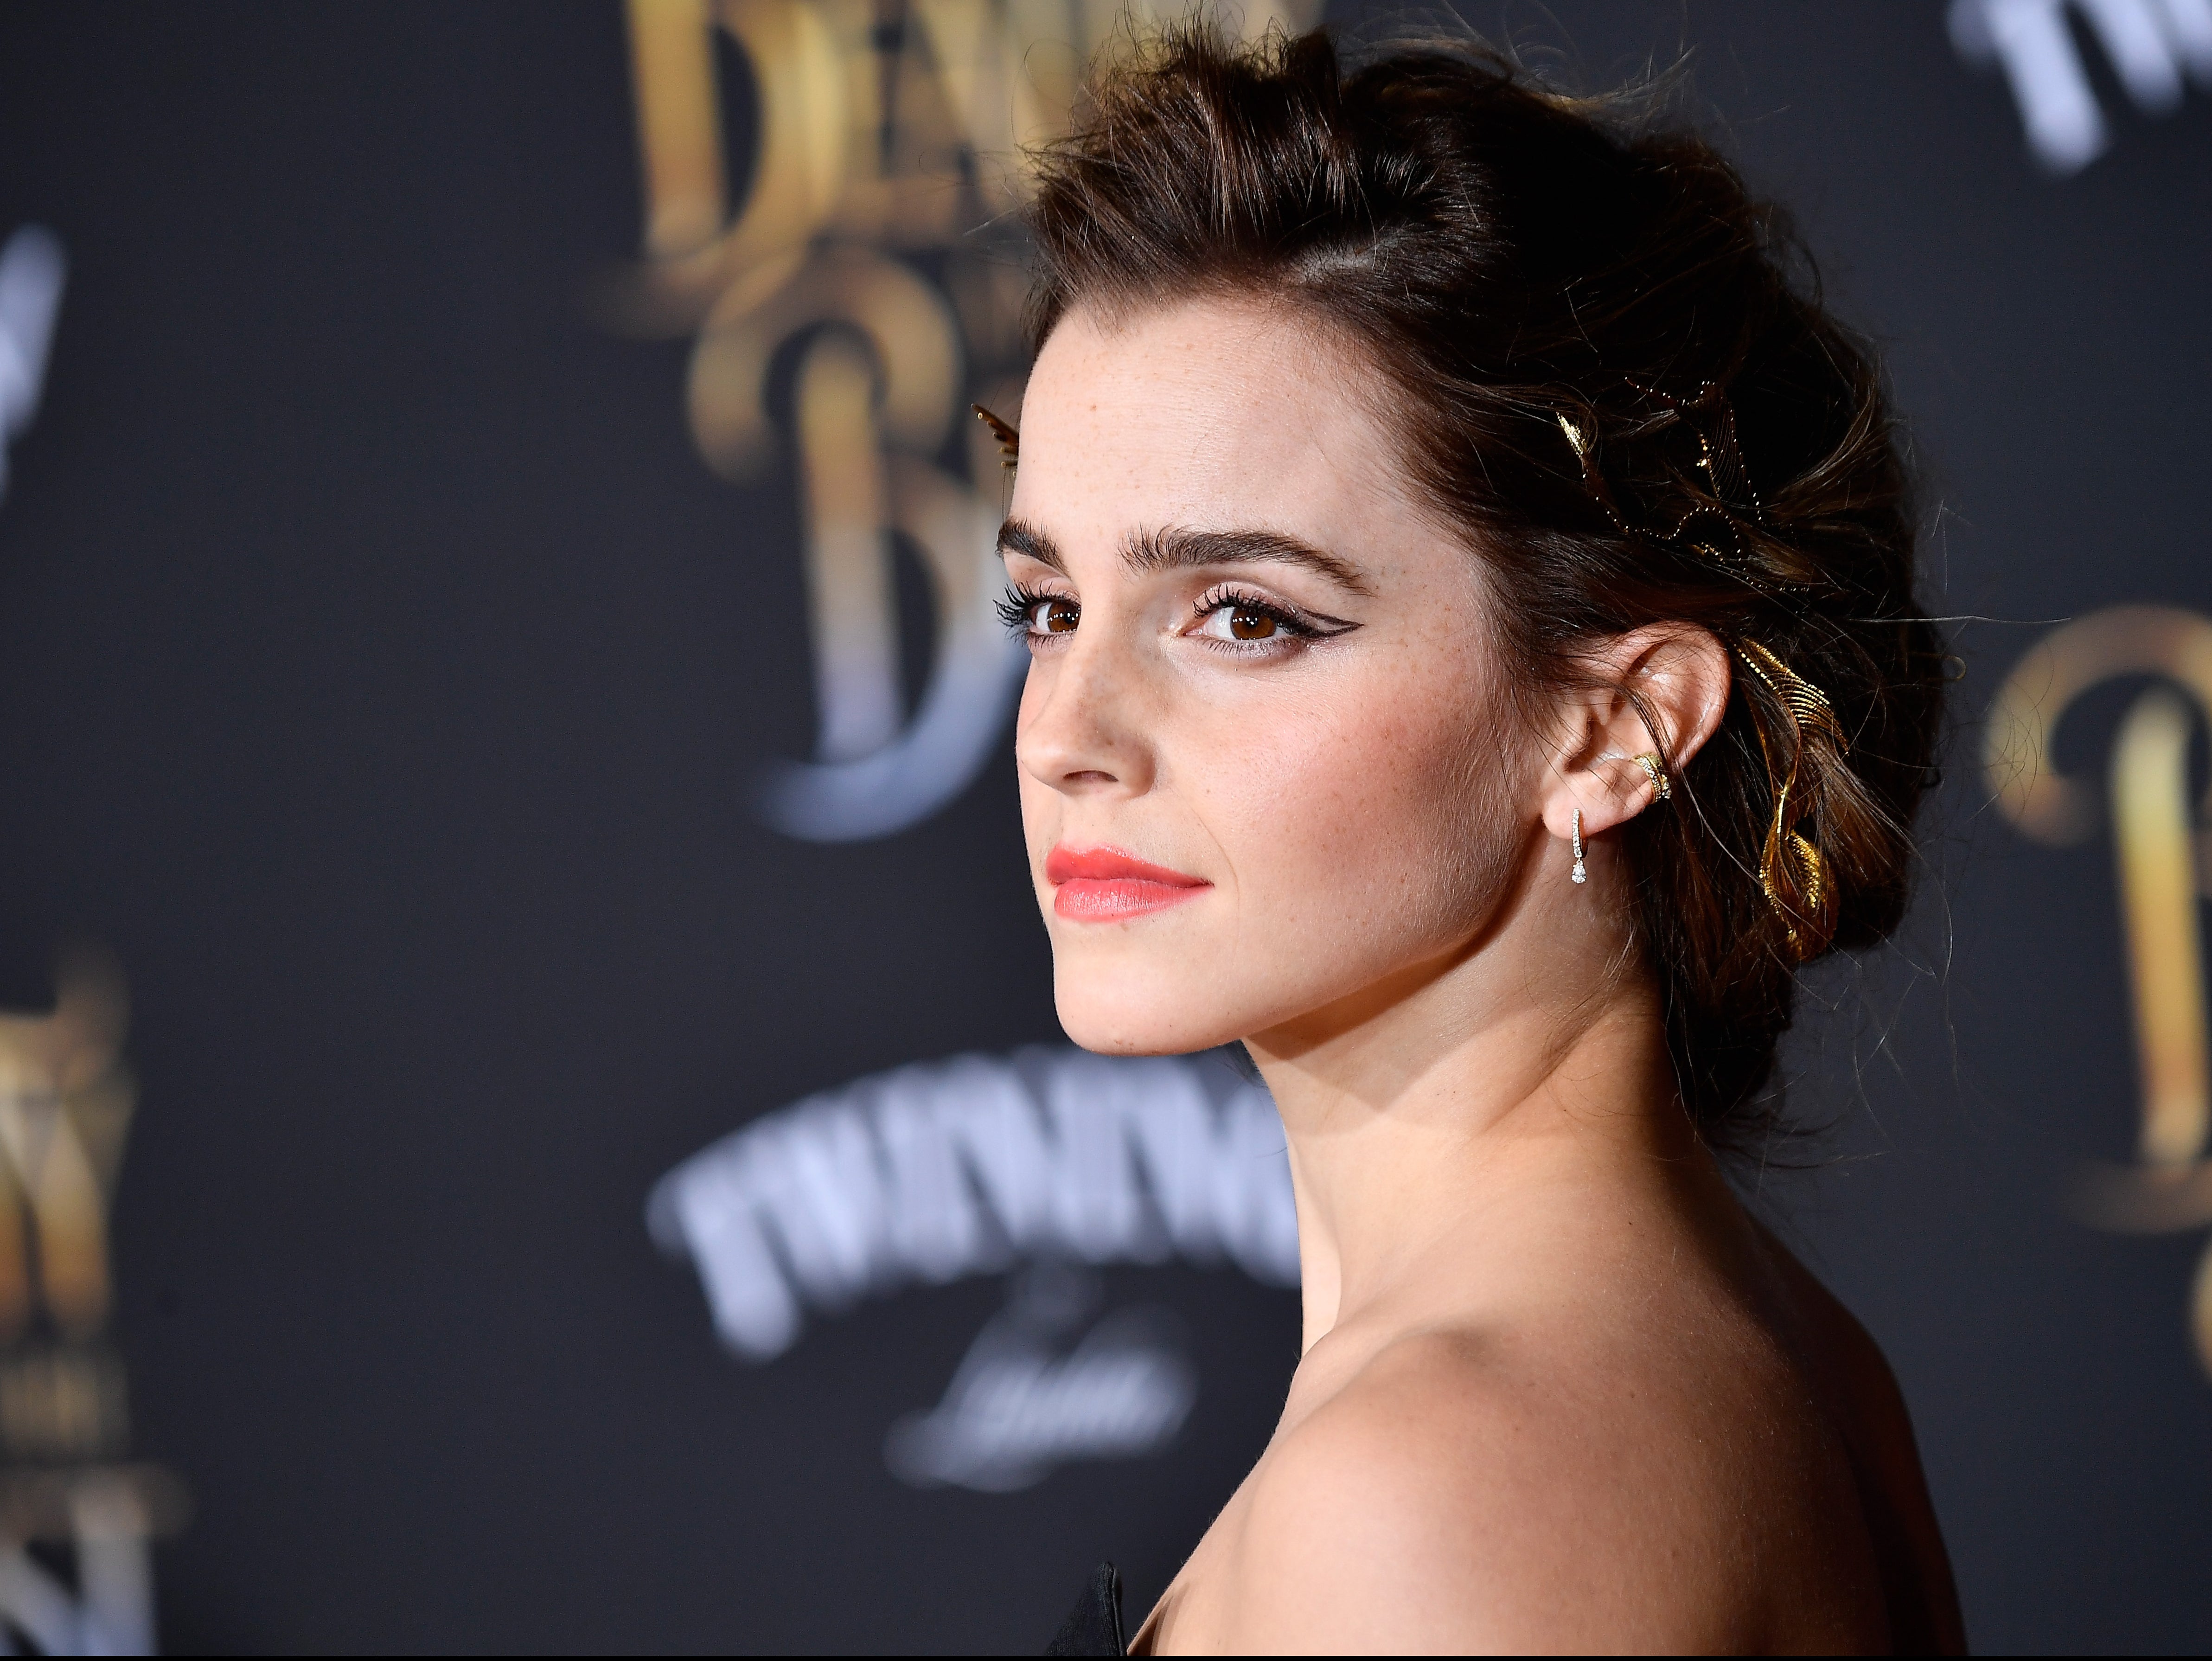 <p>The post on Emma Watson’s Instagram remains up, unlike previously supportive statements of Palestinian rights from Rihanna, Kendall Jenner and Paris Hilton</p>